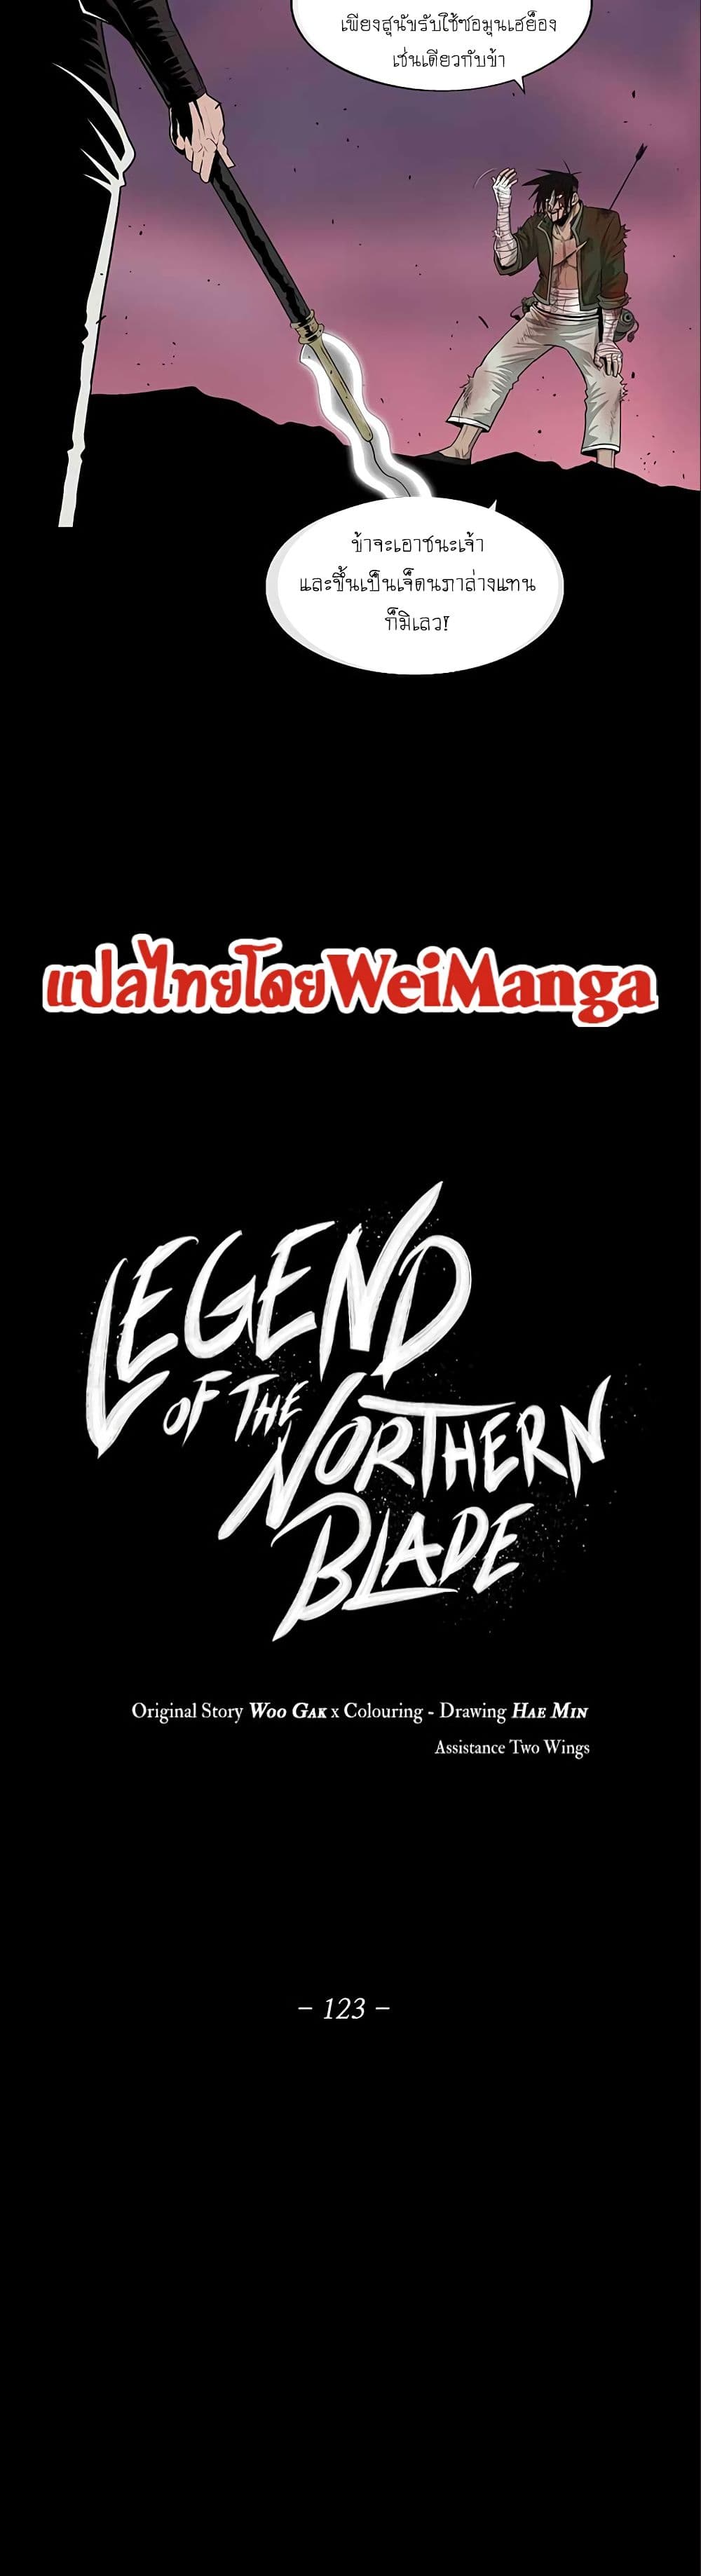 Legend of the Northern Blade 123-123